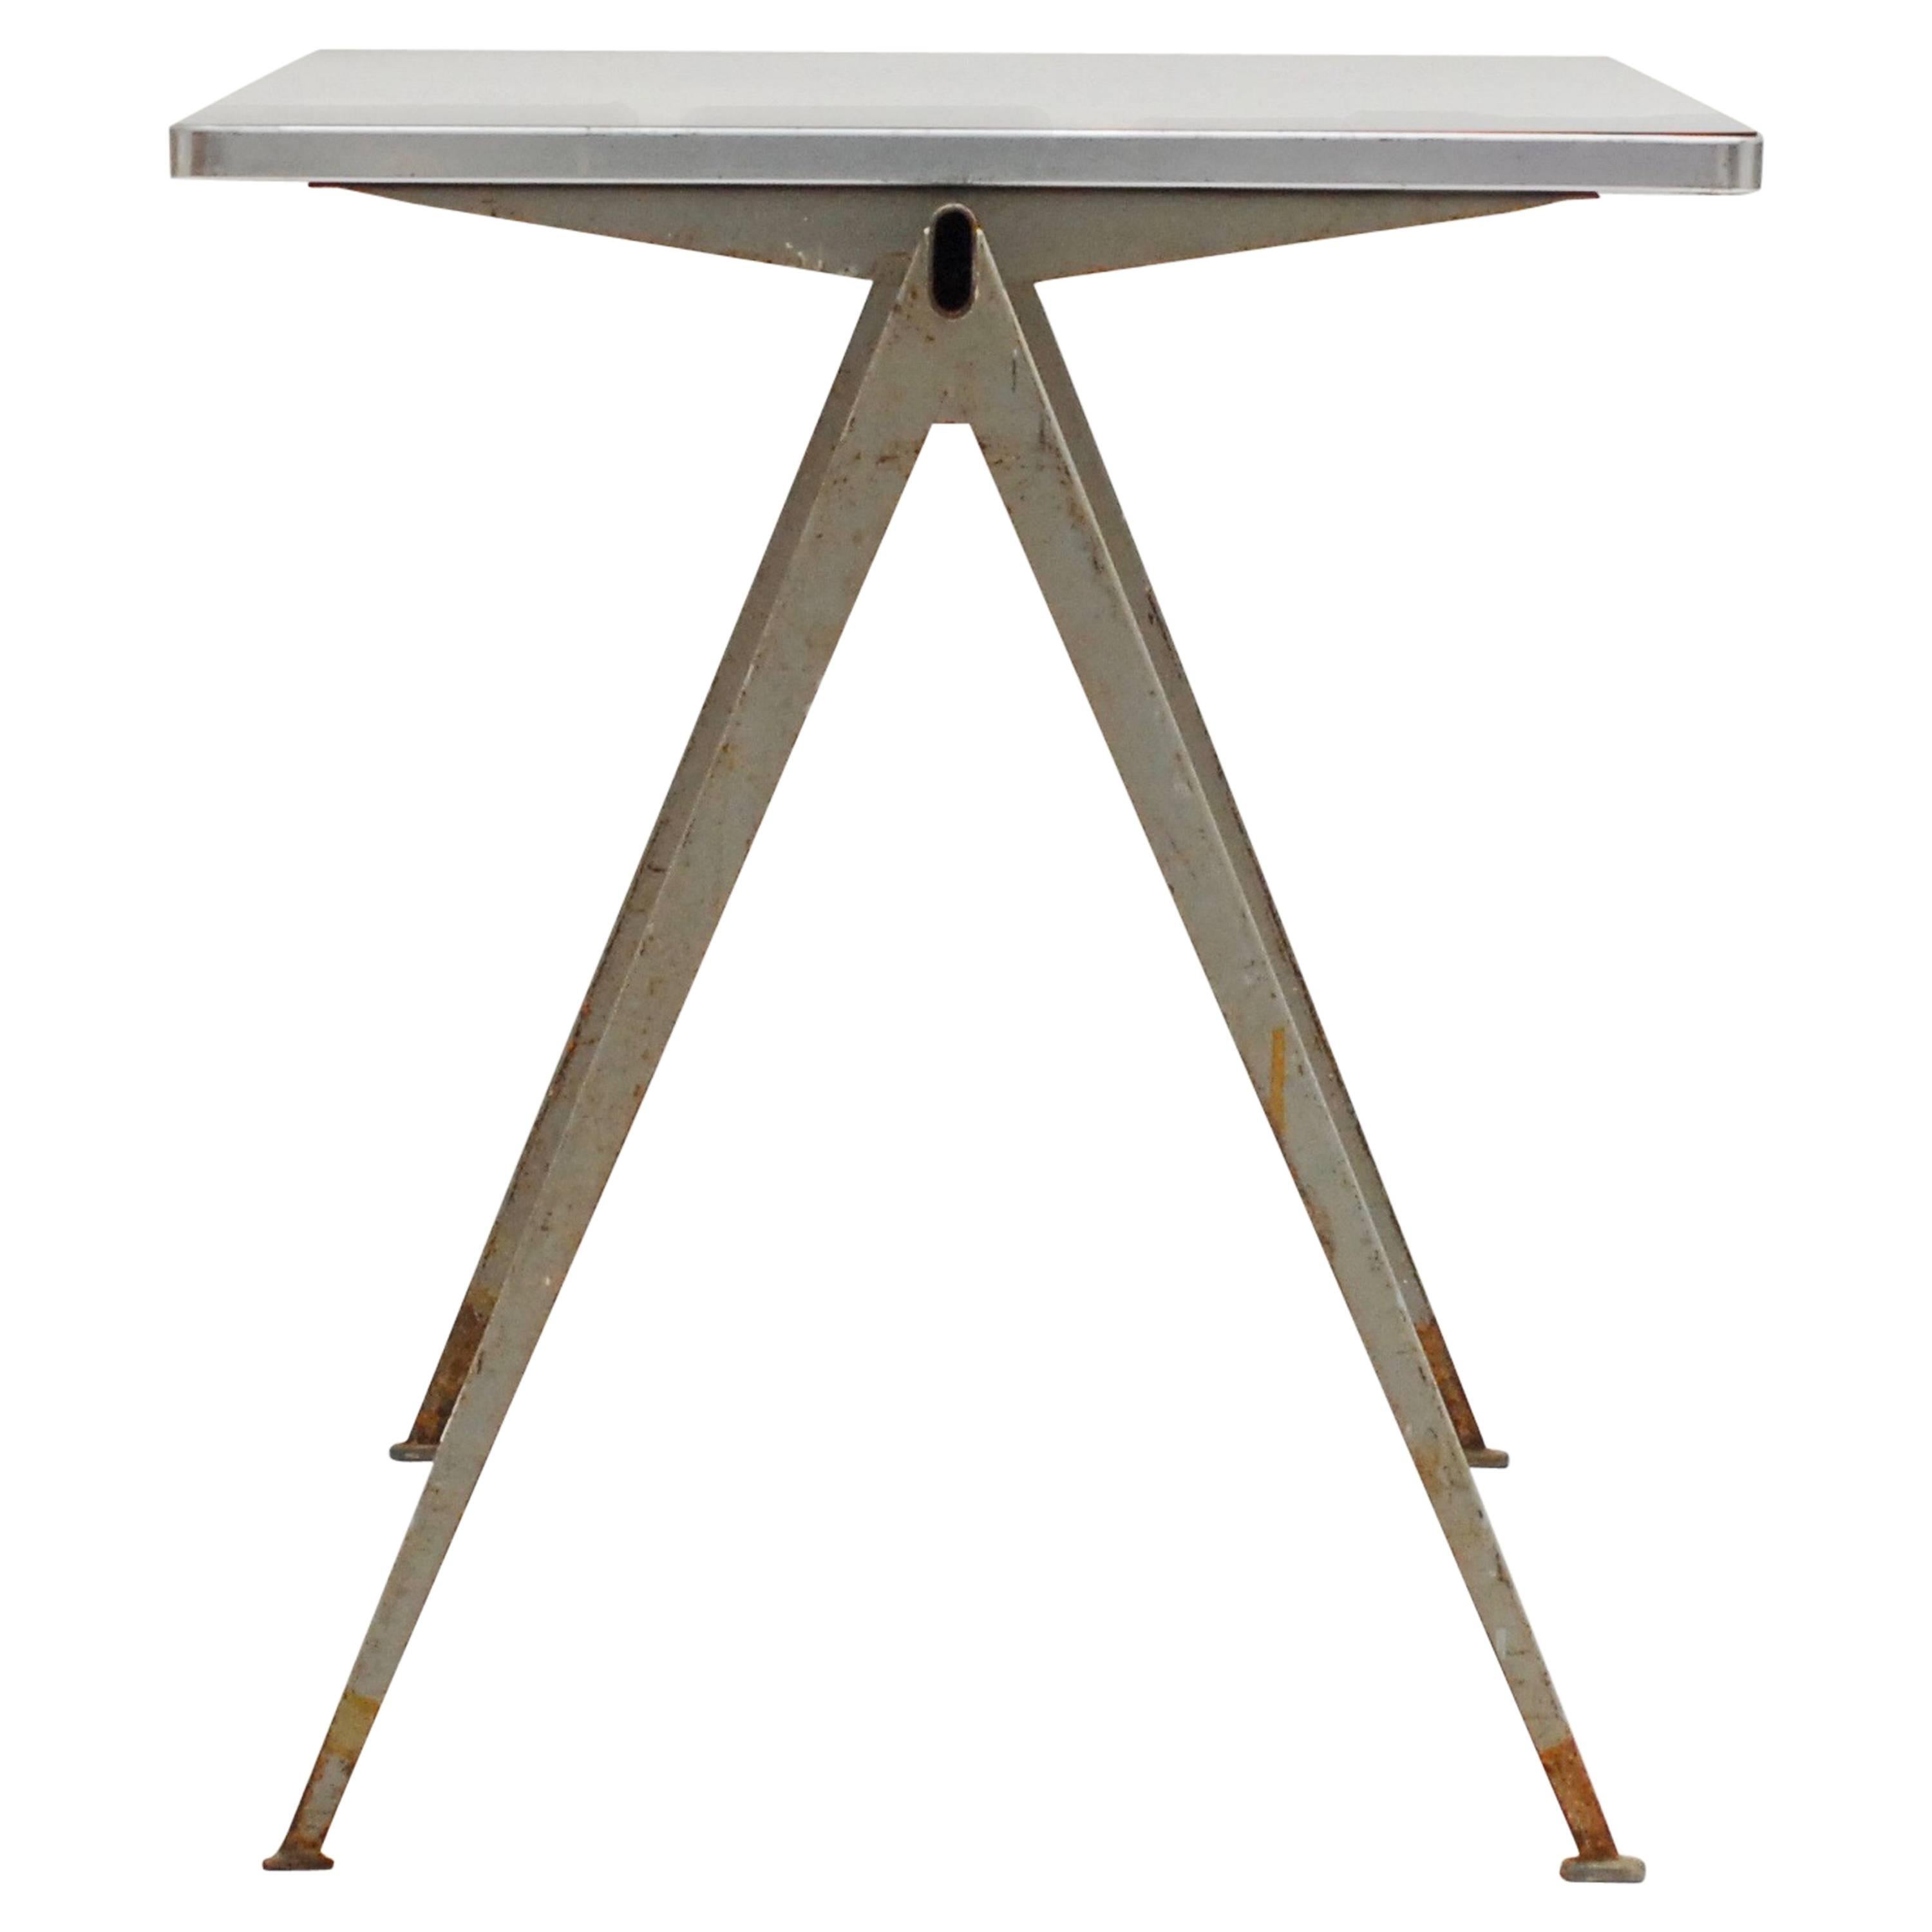 1960 Pyramid Table by Wim Rietveld for Ahrend de Cirkel For Sale